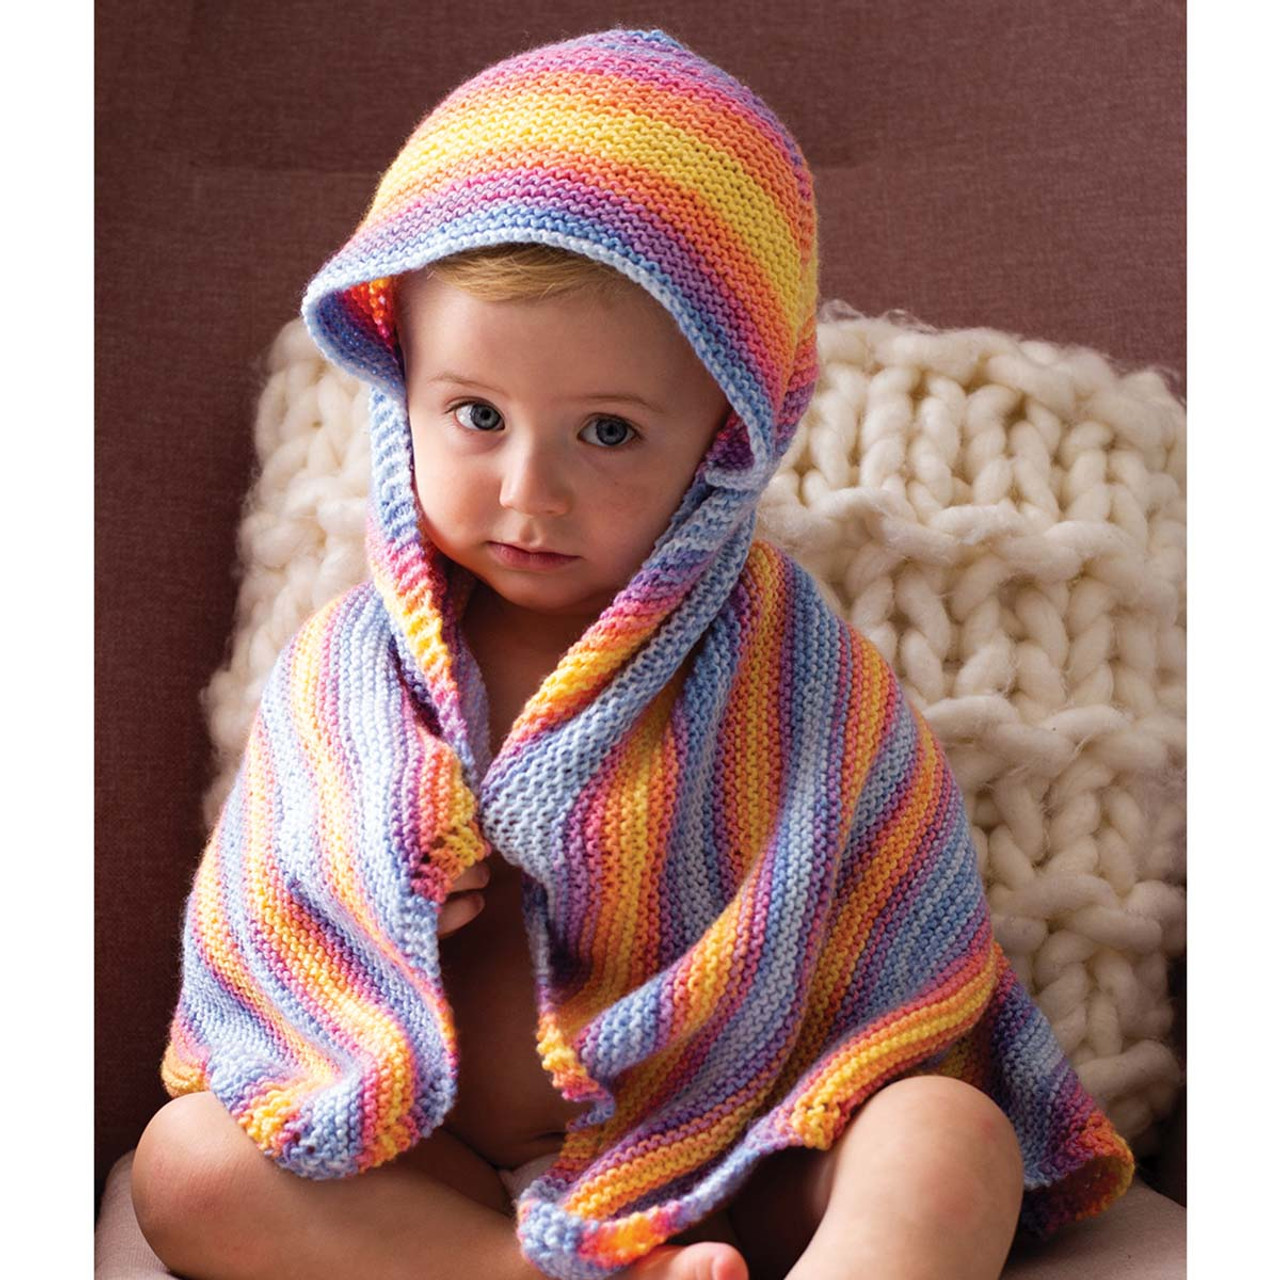 Knitting for Baby: 4 Easy Afghans from Lion Brand